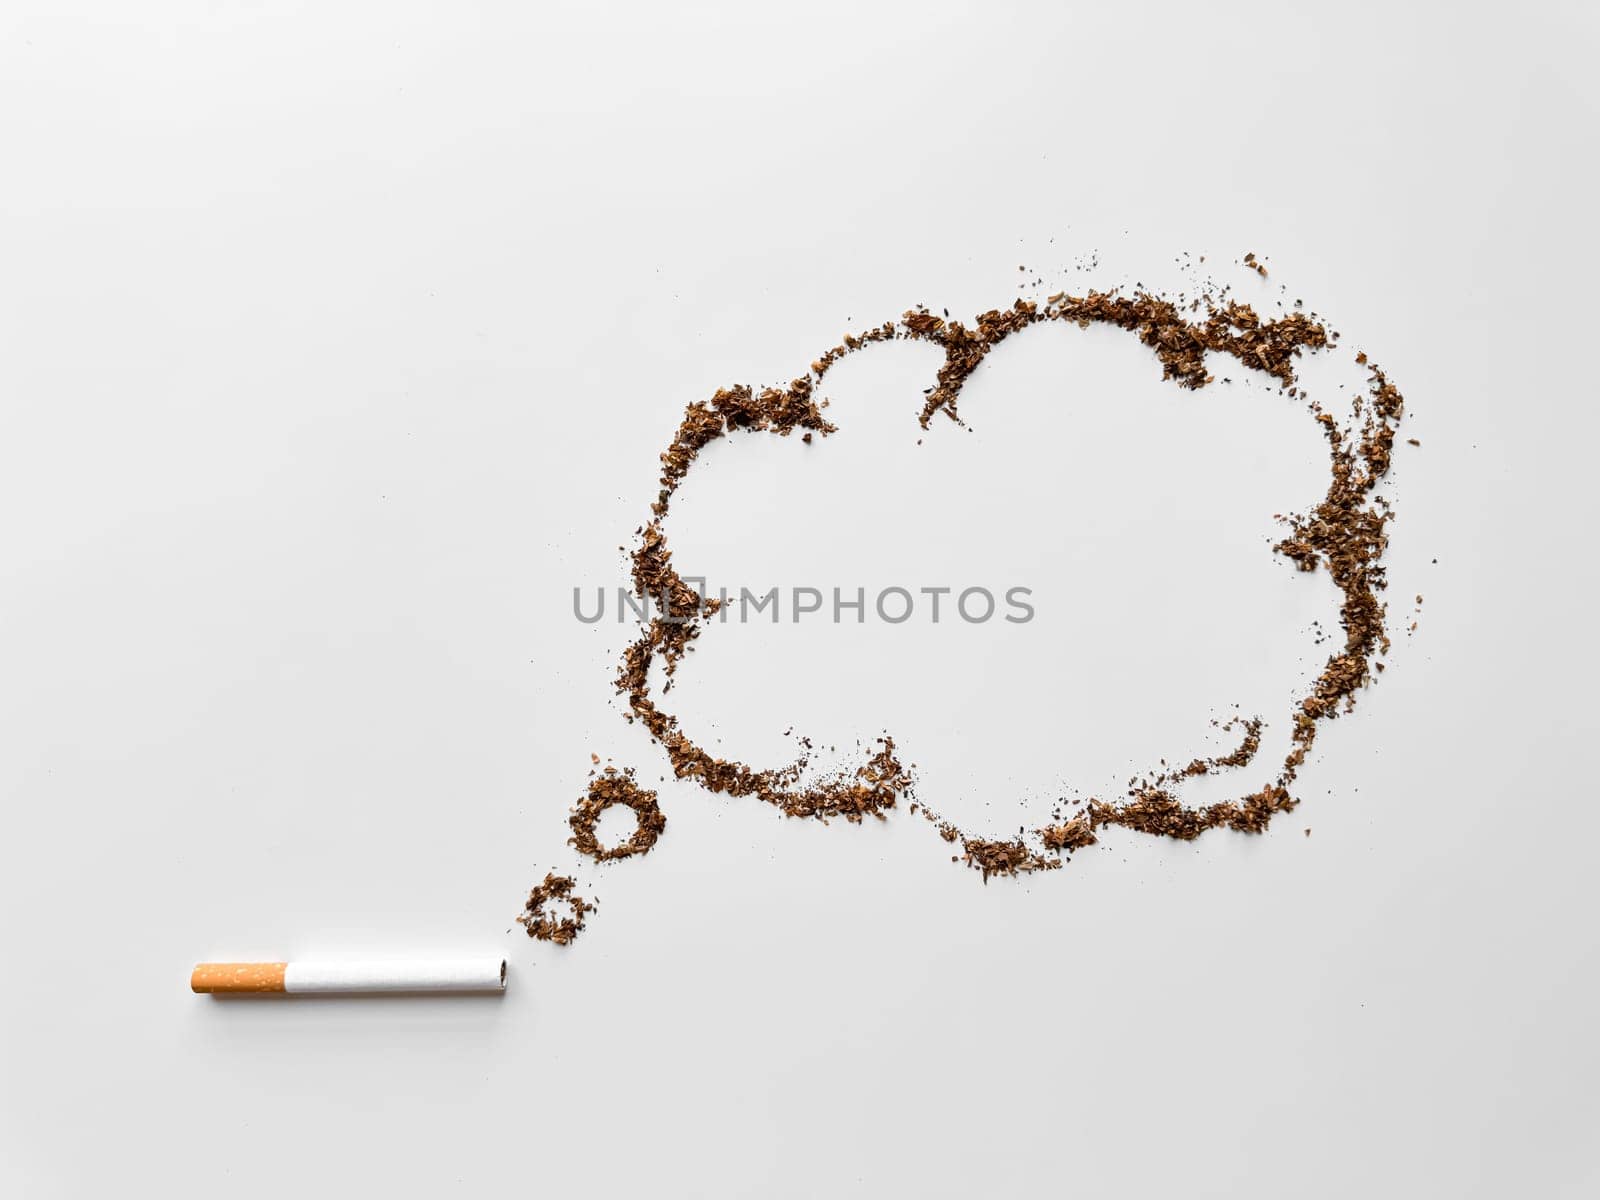 Cigarette with tobacco shaped into speech bubble on white background, representing quitting smoking and health awareness concept. No tobacco day. by Lunnica